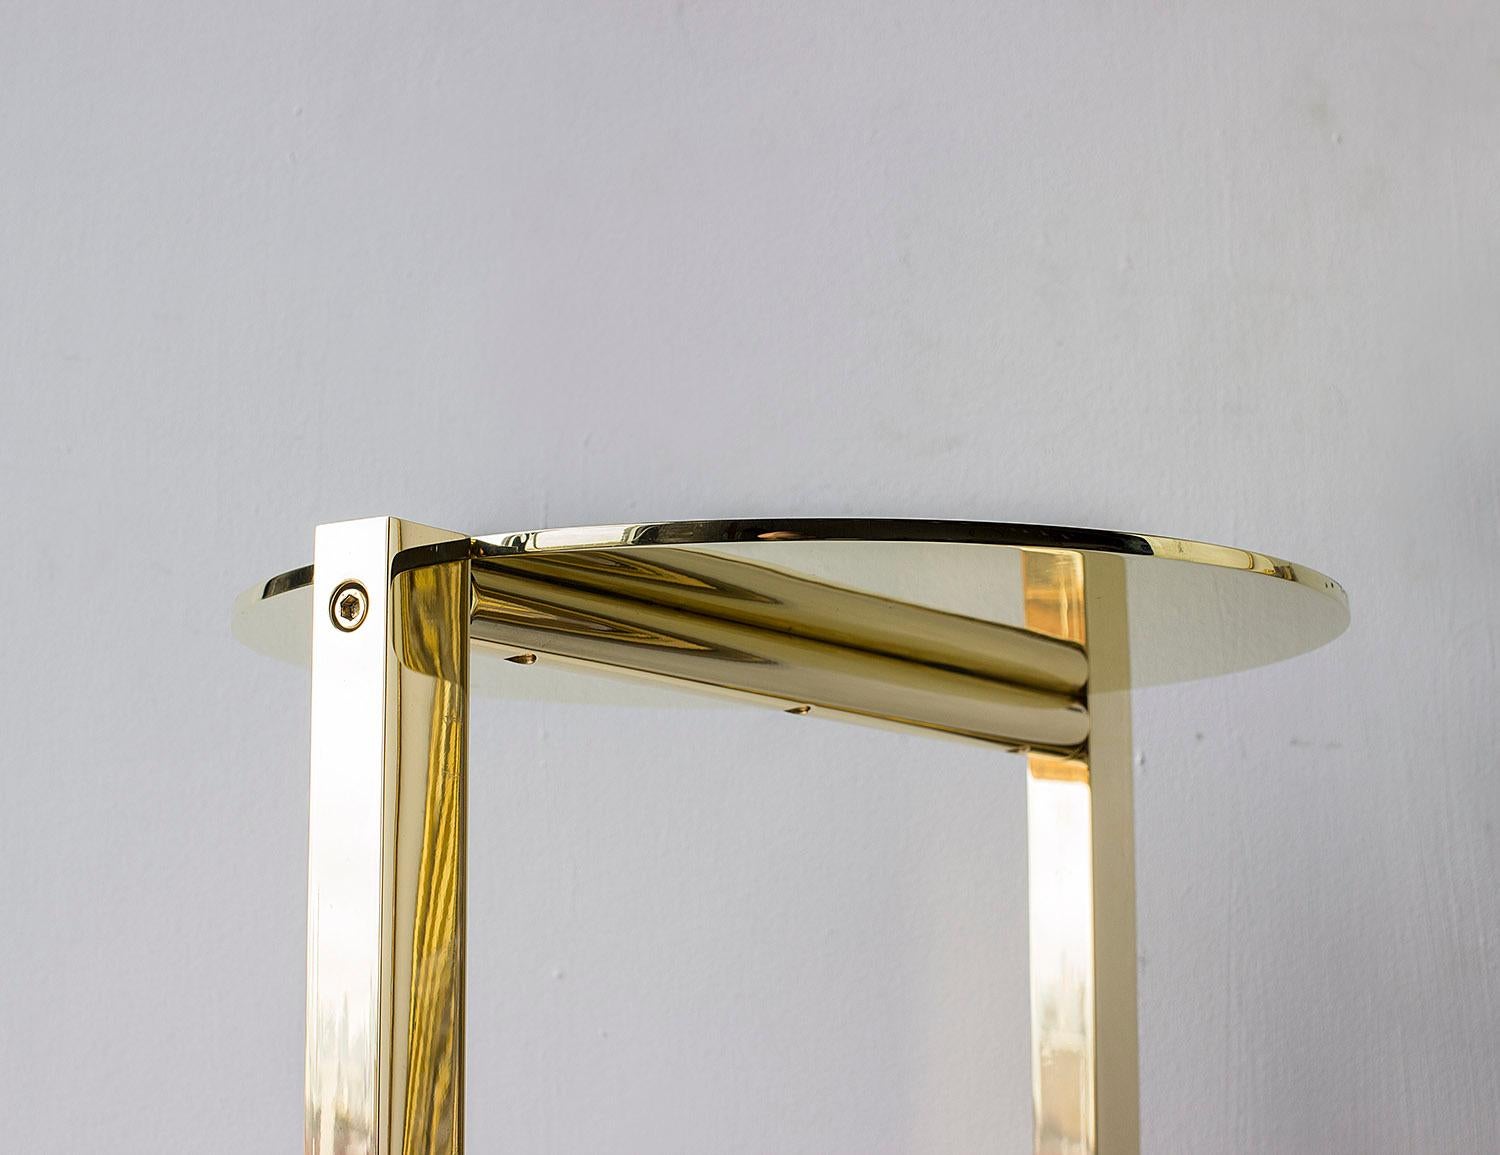 Bauhaus Untitled Side Table 2.0 Polished Brass Small Round Accent, End or Drink Tray For Sale